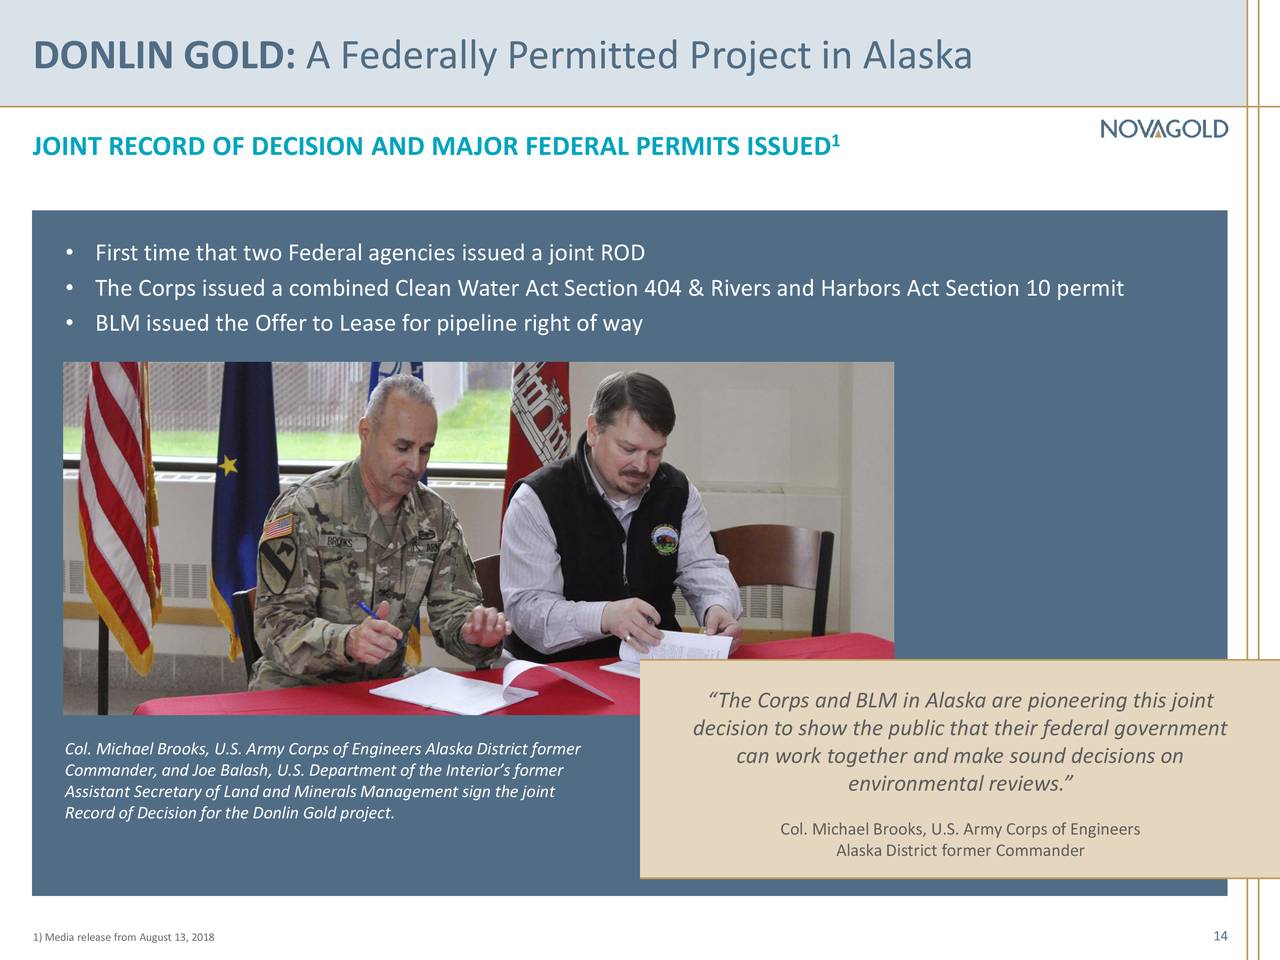 DONLIN GOLD: A Federally Permitted Project in Alaska